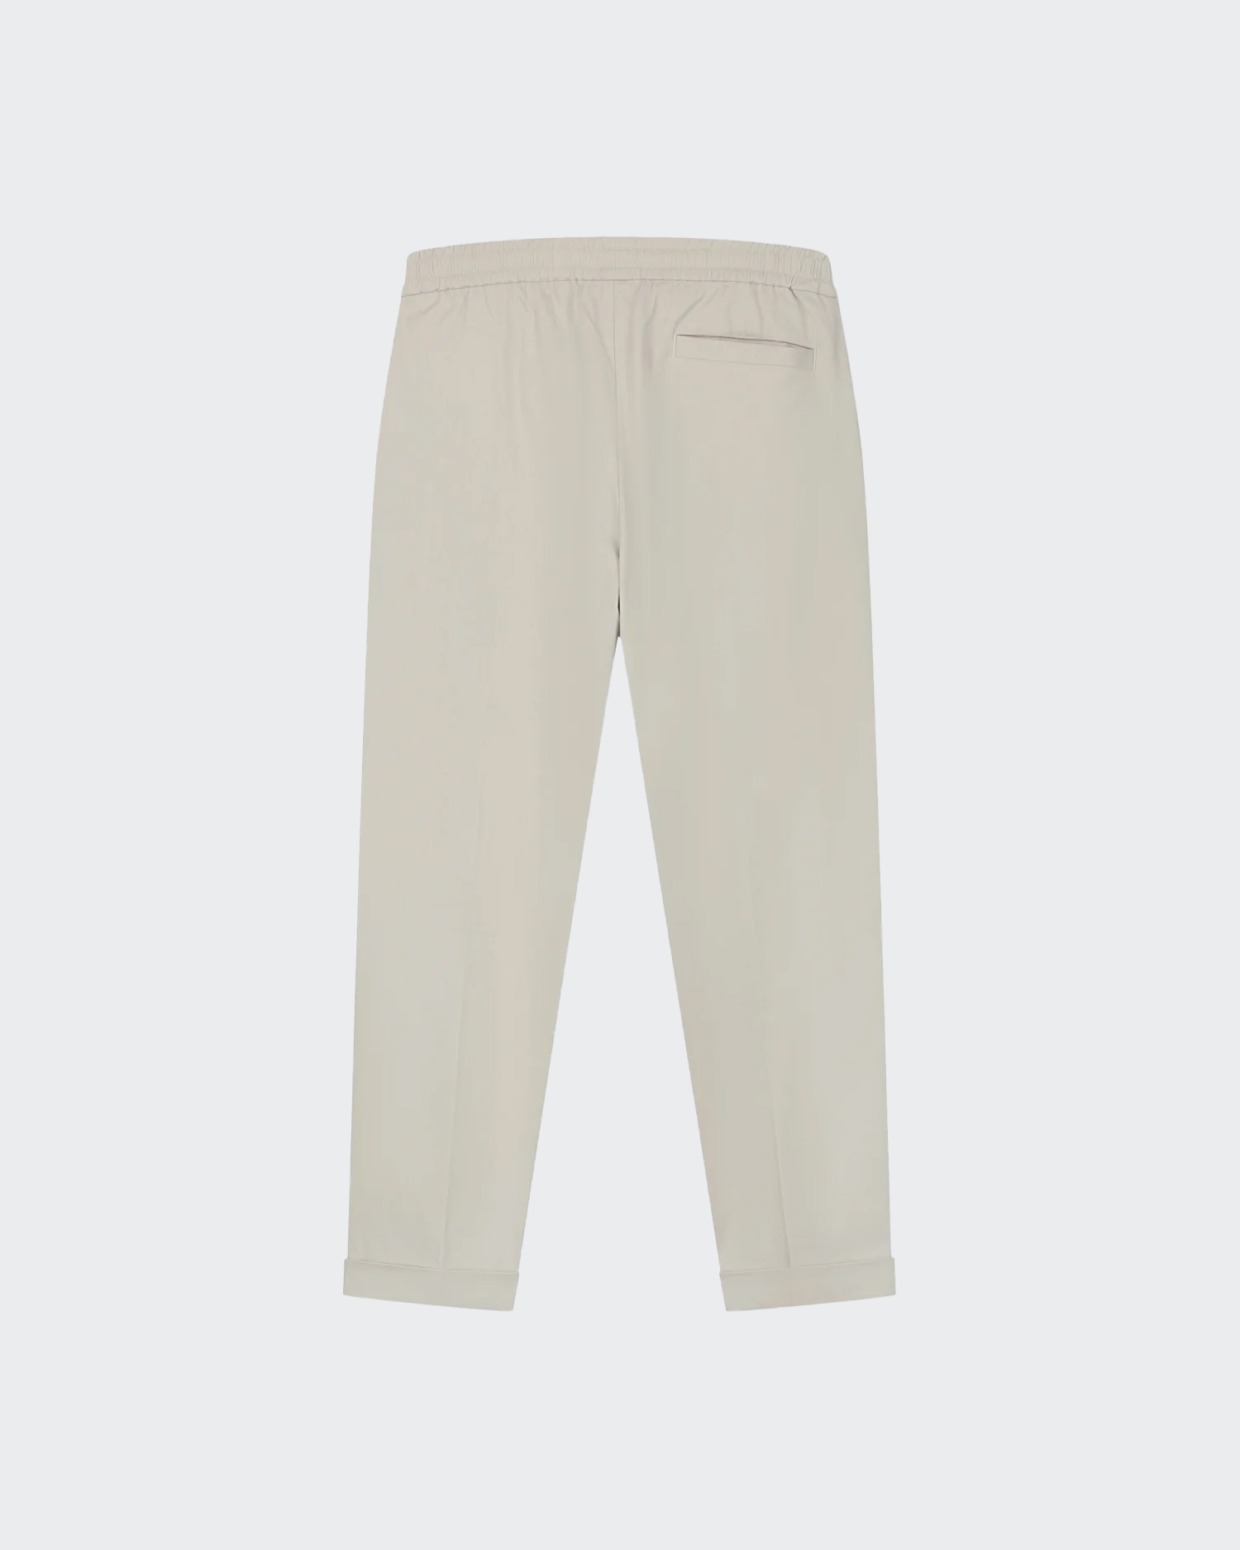 OLAF Slim Cotton Trousers